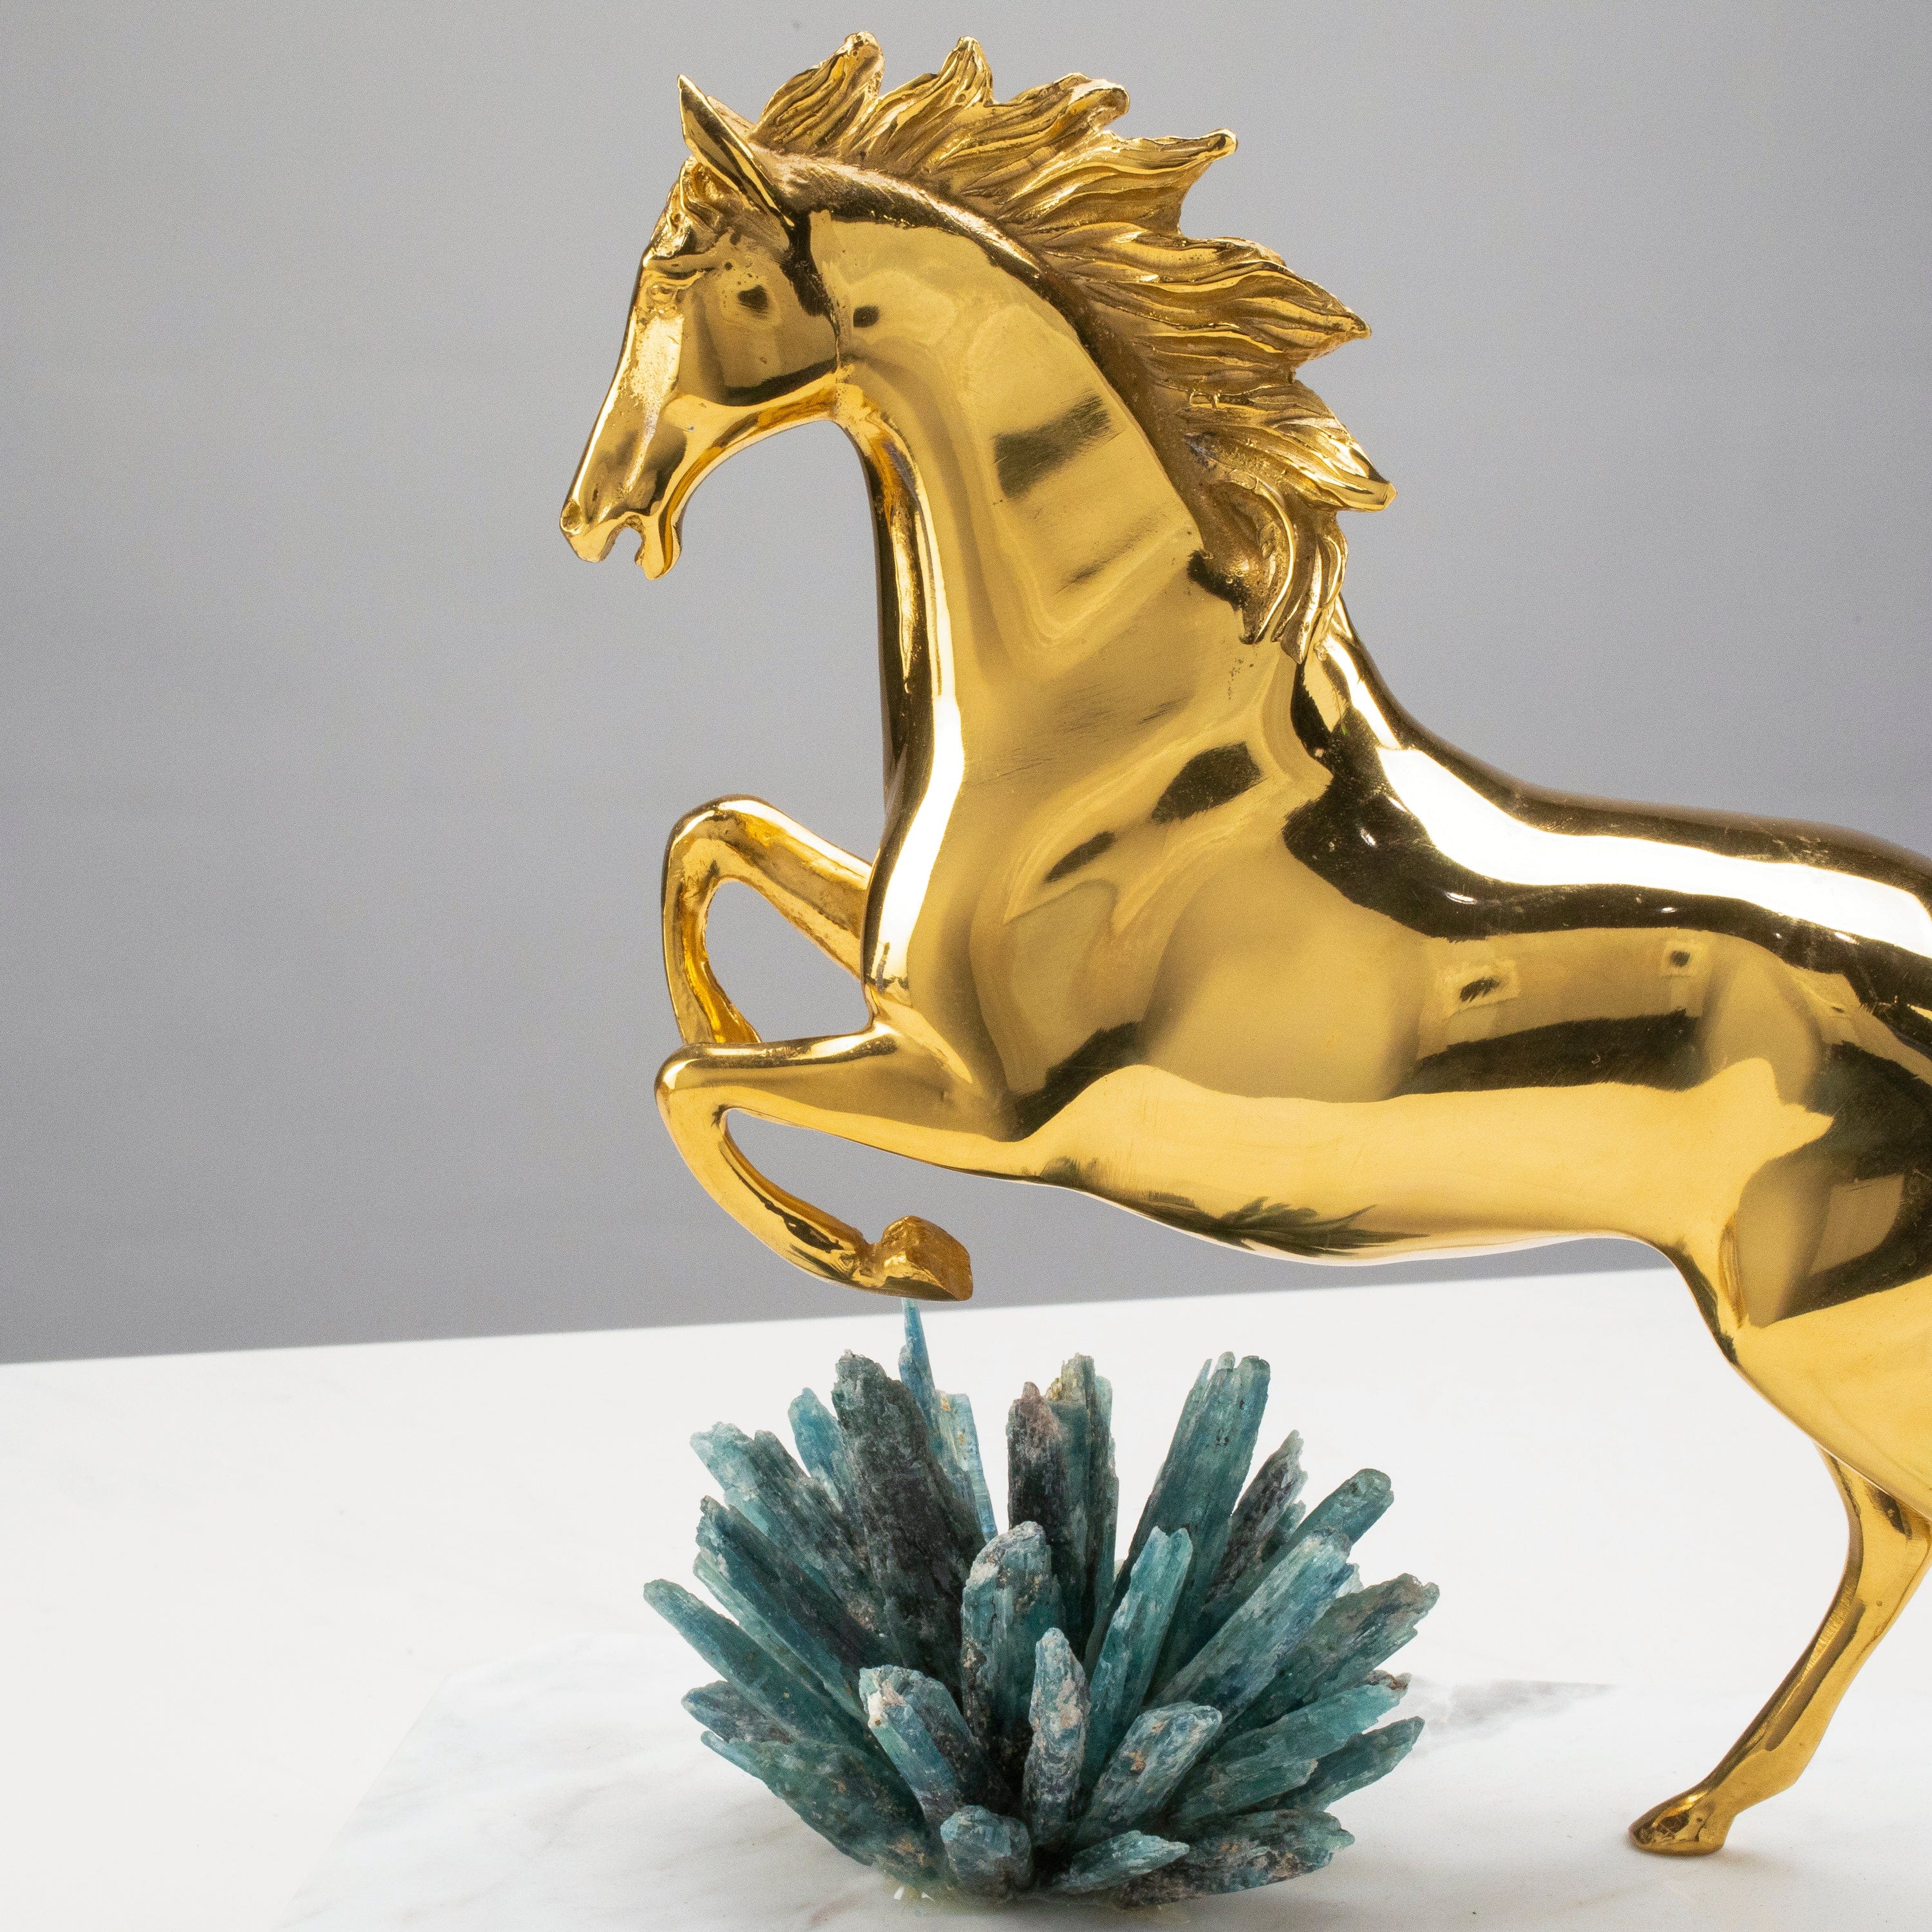 KALIFANO Crystal Home Decor Brass Horse with Kyanite Cluster on Marble Base HG1110-KY